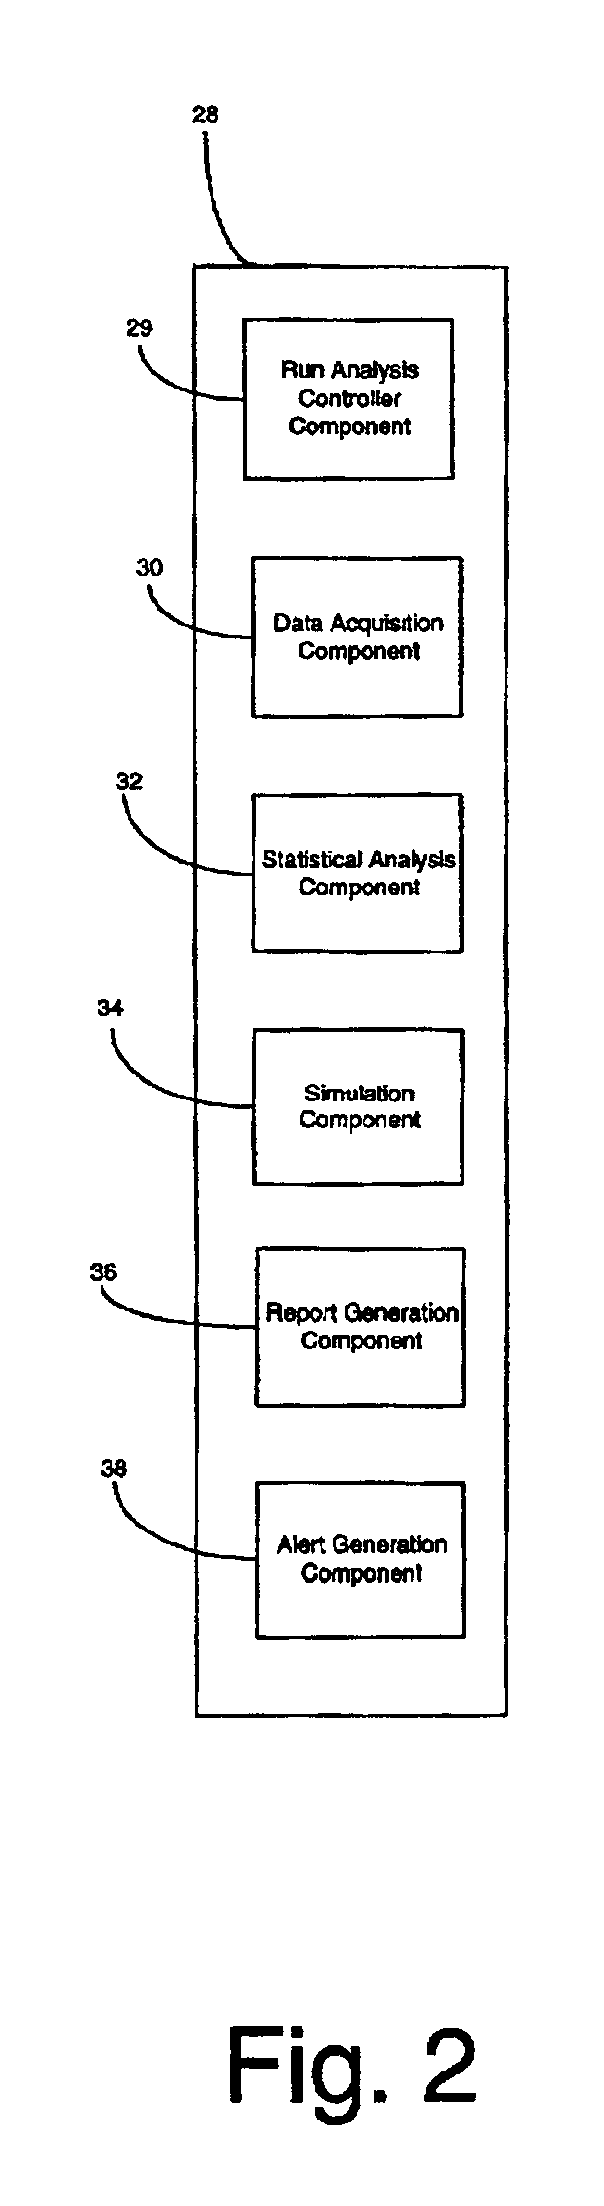 System, method and computer product for performing automated predictive reliability